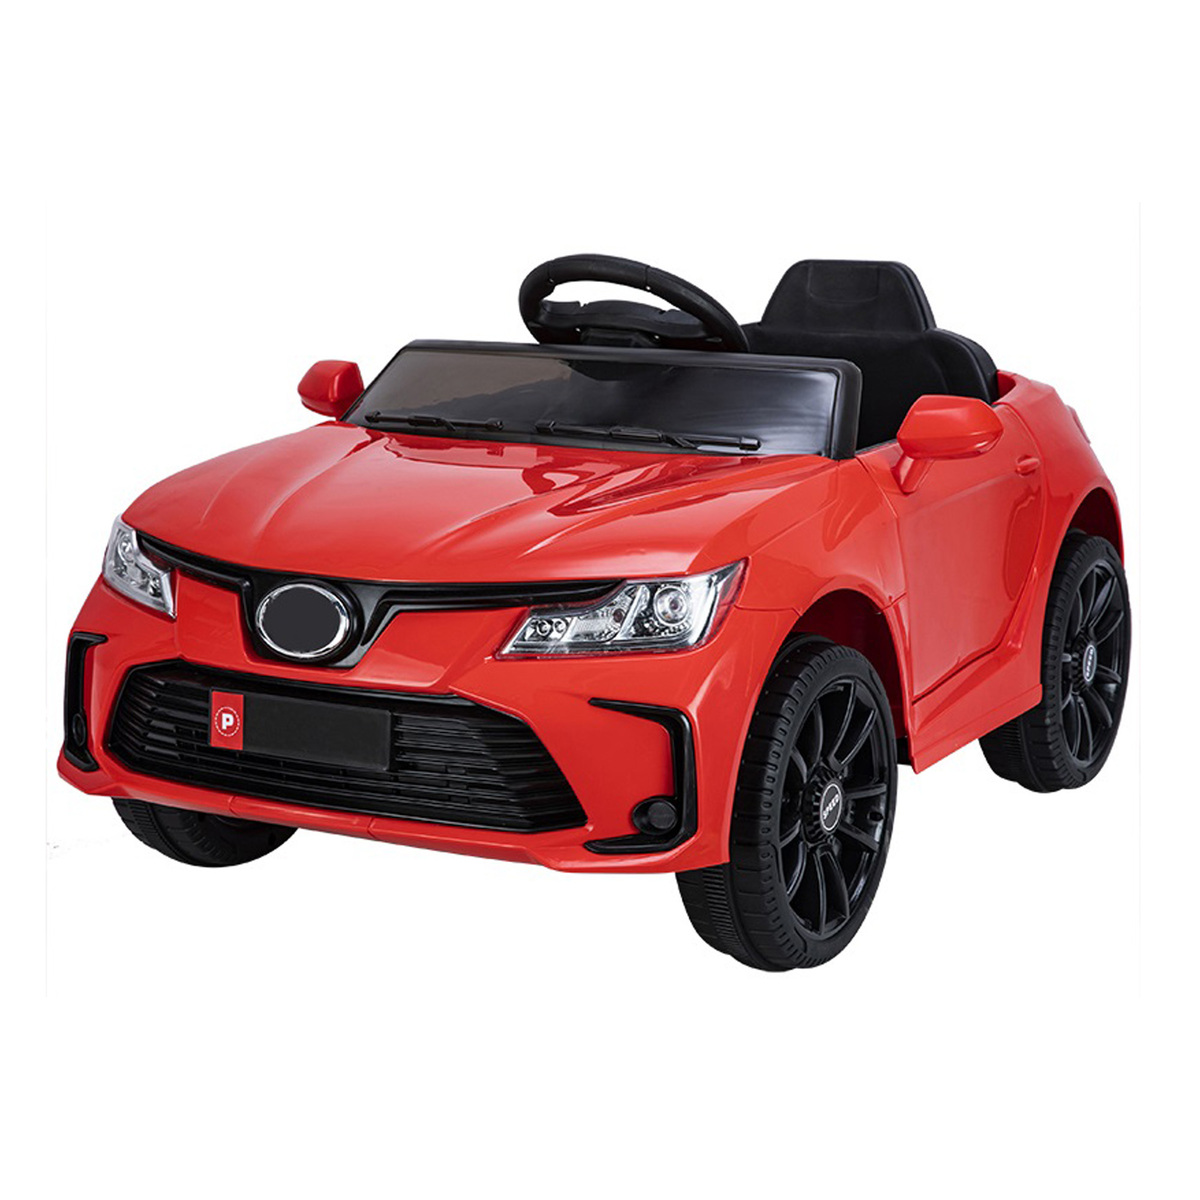 Skid Fusion Kids Ride On Car Assorted Model